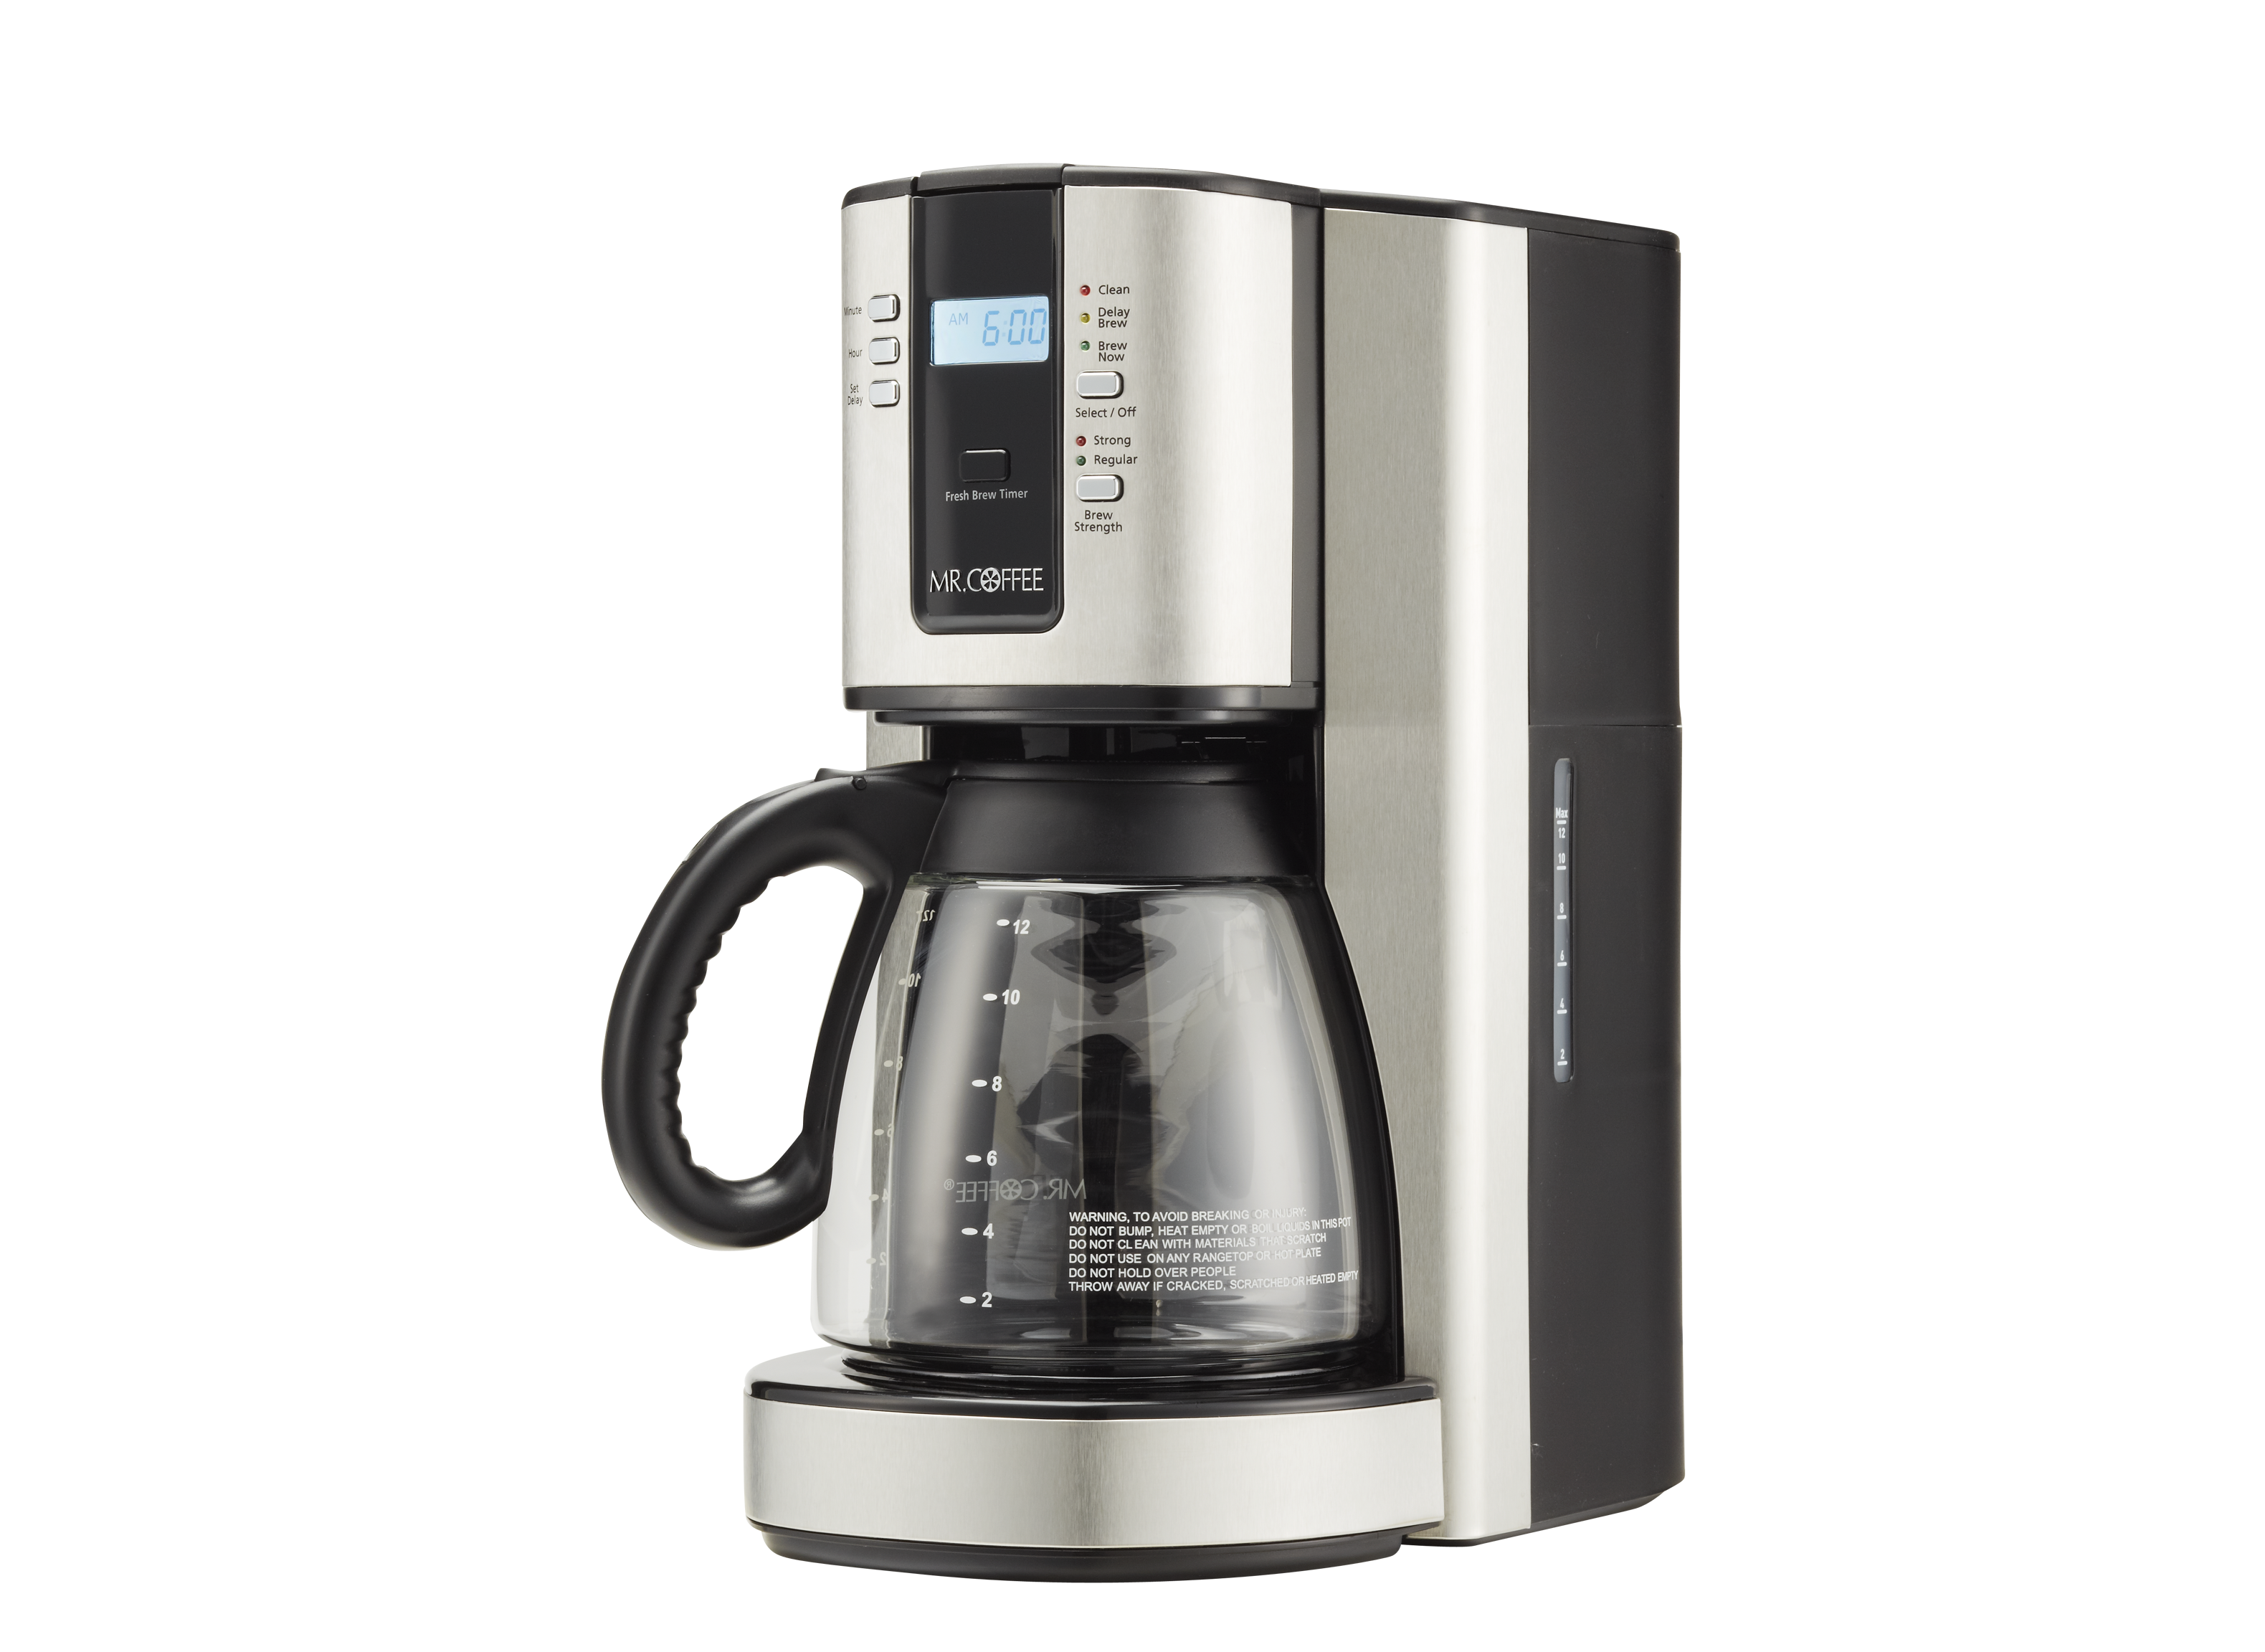 https://crdms.images.consumerreports.org/prod/products/cr/models/281974-coffeemakers-mrcoffee-bvmctjx37.png